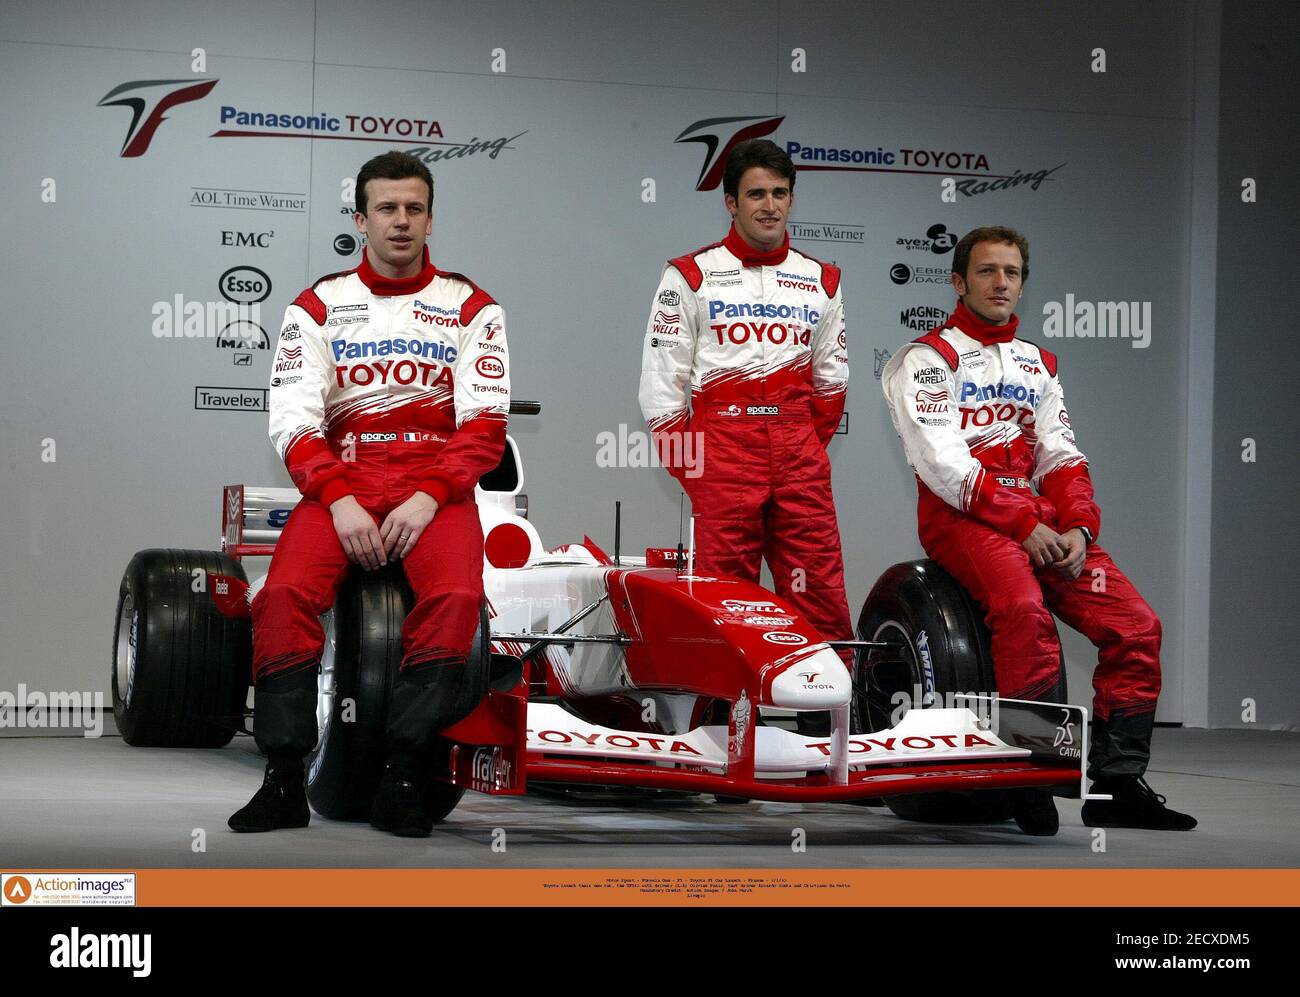 Motor Sport - Formula One - F1 - Toyota F1 Car Launch - France - 8/1/03  Toyota launch their new car, the TF103 with drivers (L-R) Olivier Panis,  test driver Ricardo Zonta